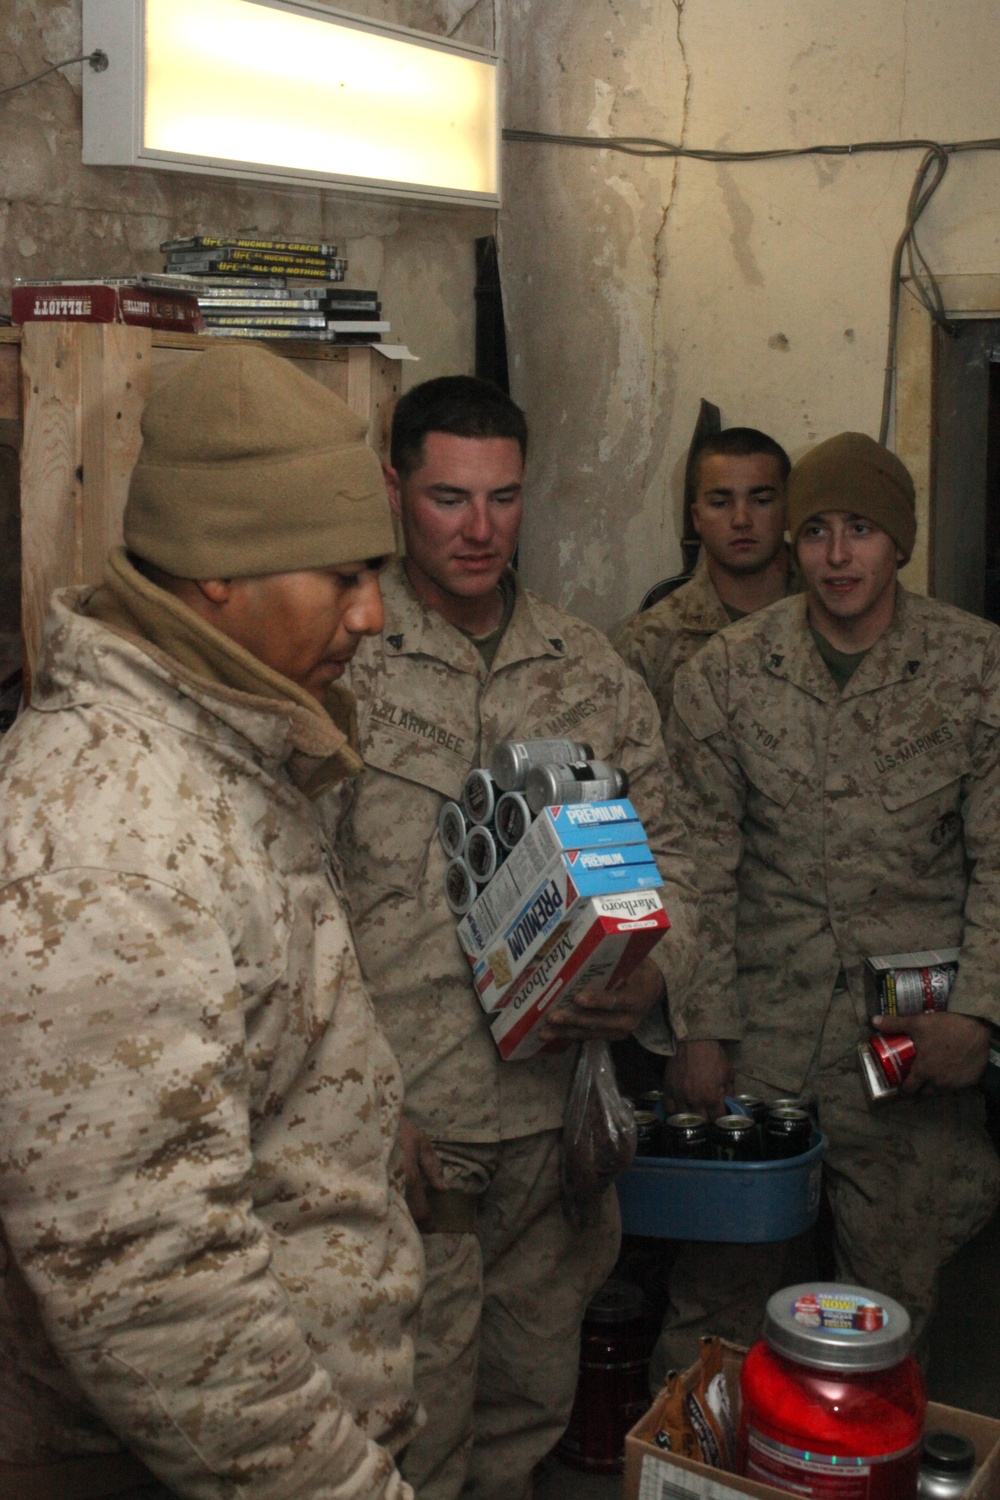 Bringing a bit of home to Marines on Christmas